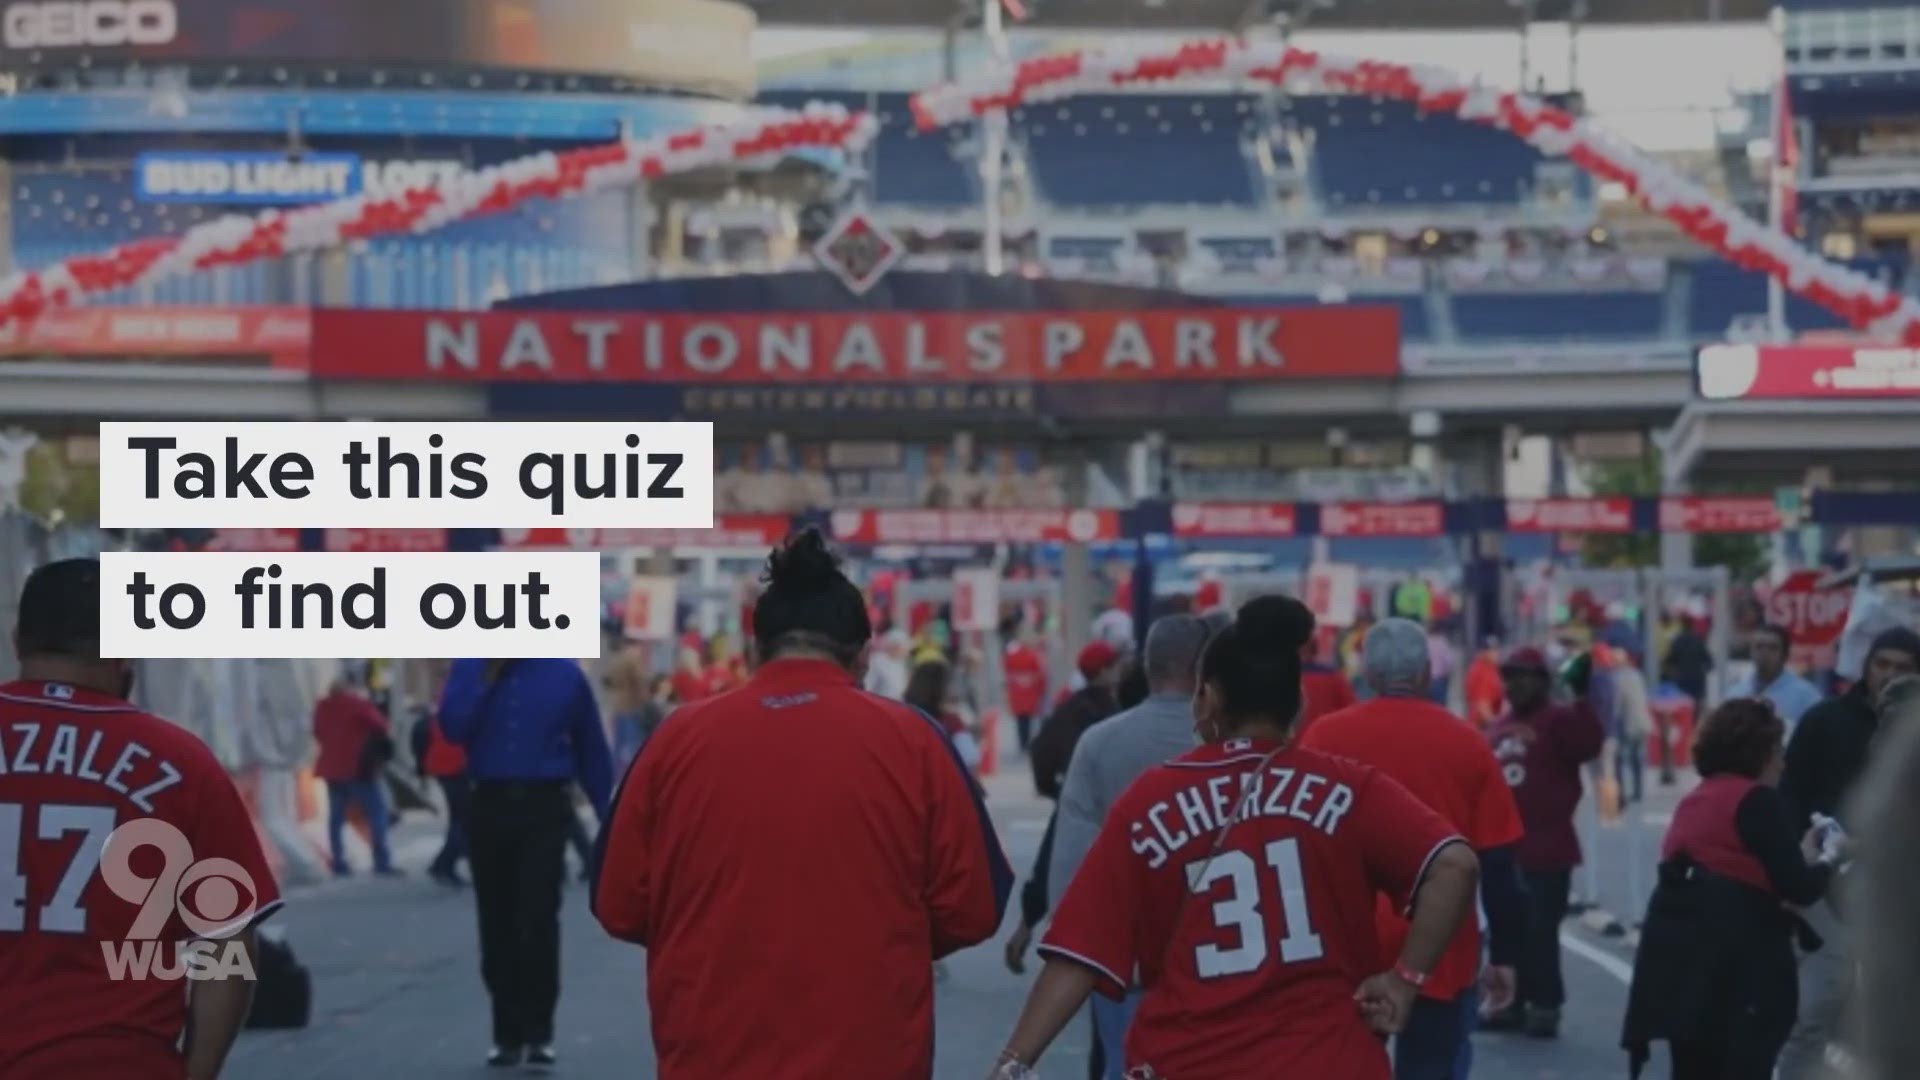 Put your Washington Nationals skills to the test and see if you're a die-hard Nationals fan, or just hopping on the bandwagon.